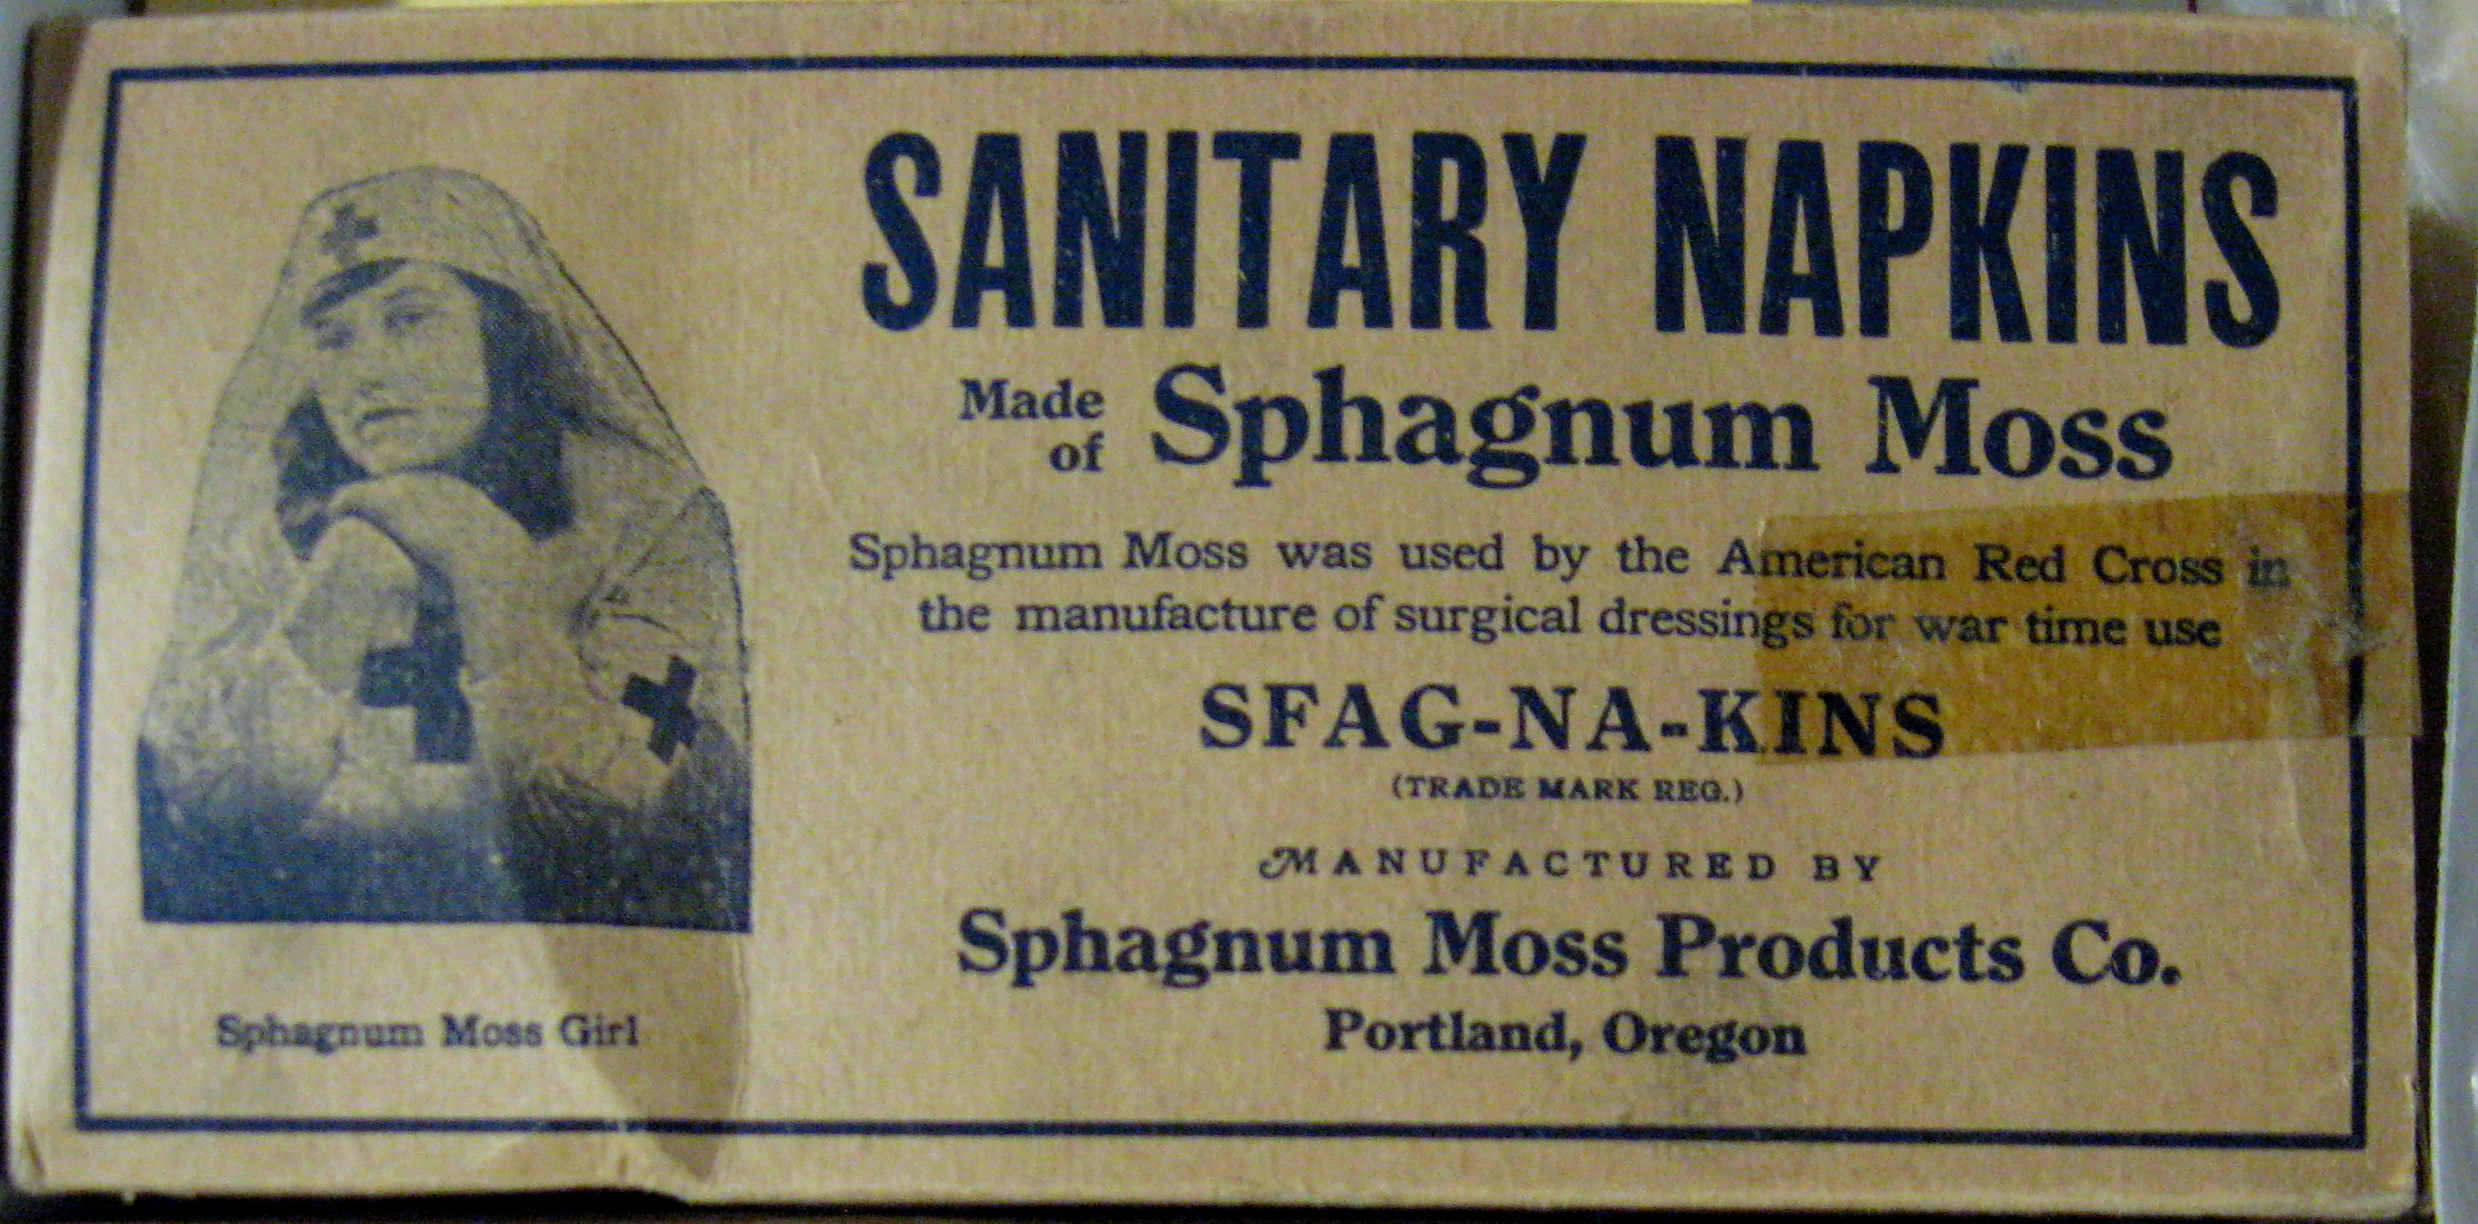 The Smithsonian Menstrual Archive